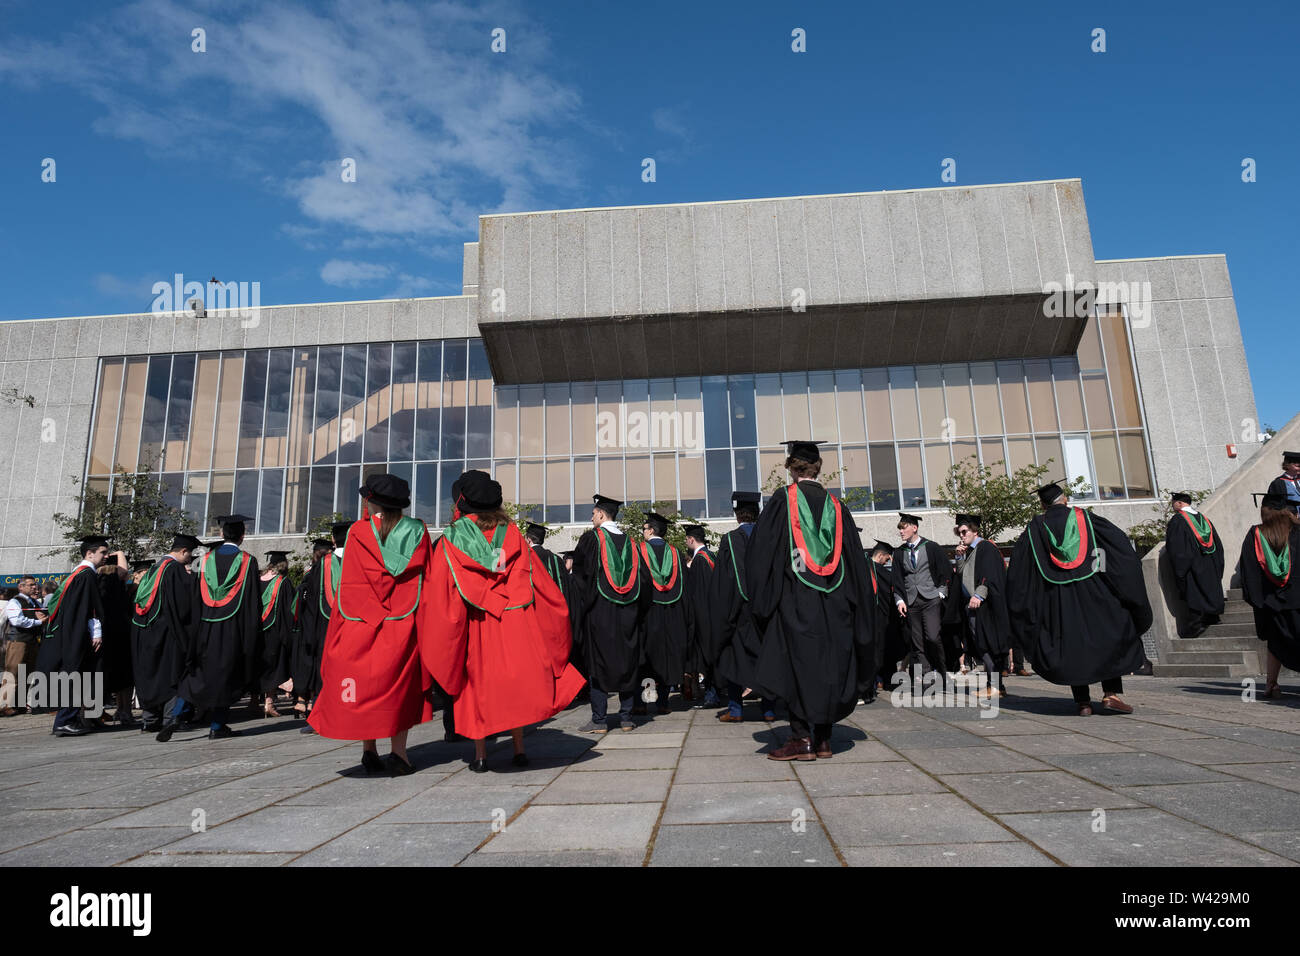 Higher education in the UK - successful students at the graduation ceremony at Aberystwyth university, after receiving their degrees,  wearing their traditional caps and gowns. July 2019 Stock Photo